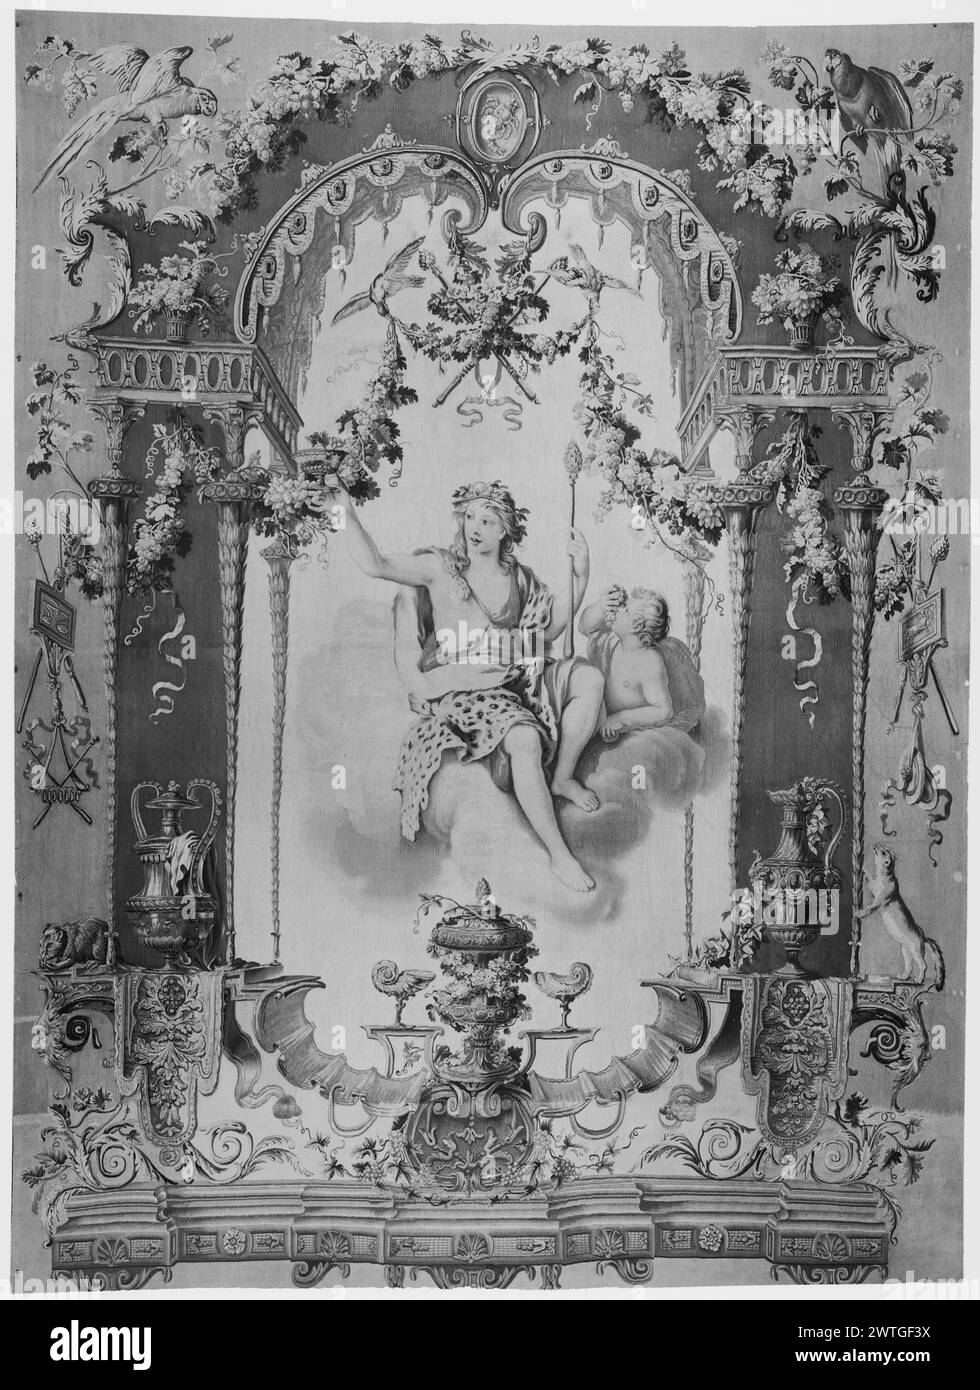 Bacchus (Dionysus). Audran, Claude III (French, 1658-1734) (designed after) [painter] Boulogne, Louis (the Younger) (French, 1654-1733) (designed after, figures) [painter] Corneille, Jean-Baptiste (French, 1649-1695) (designed after, figures) [painter] Desportes, Alexandre-François (French, 1661-1743) (designed after, animals) [painter] c. 1700-1800 Tapestry Dimensions: H 8'9' x W 6'7.5' Tapestry Materials/Techniques: unknown Culture: French Weaving Center: Paris Ownership History: French & Co. purchased from Mrs. Seton Porter, received 4/1/1949; sold to Mr. Alfred Jaeger 12/31/1961. Bacchus h Stock Photo